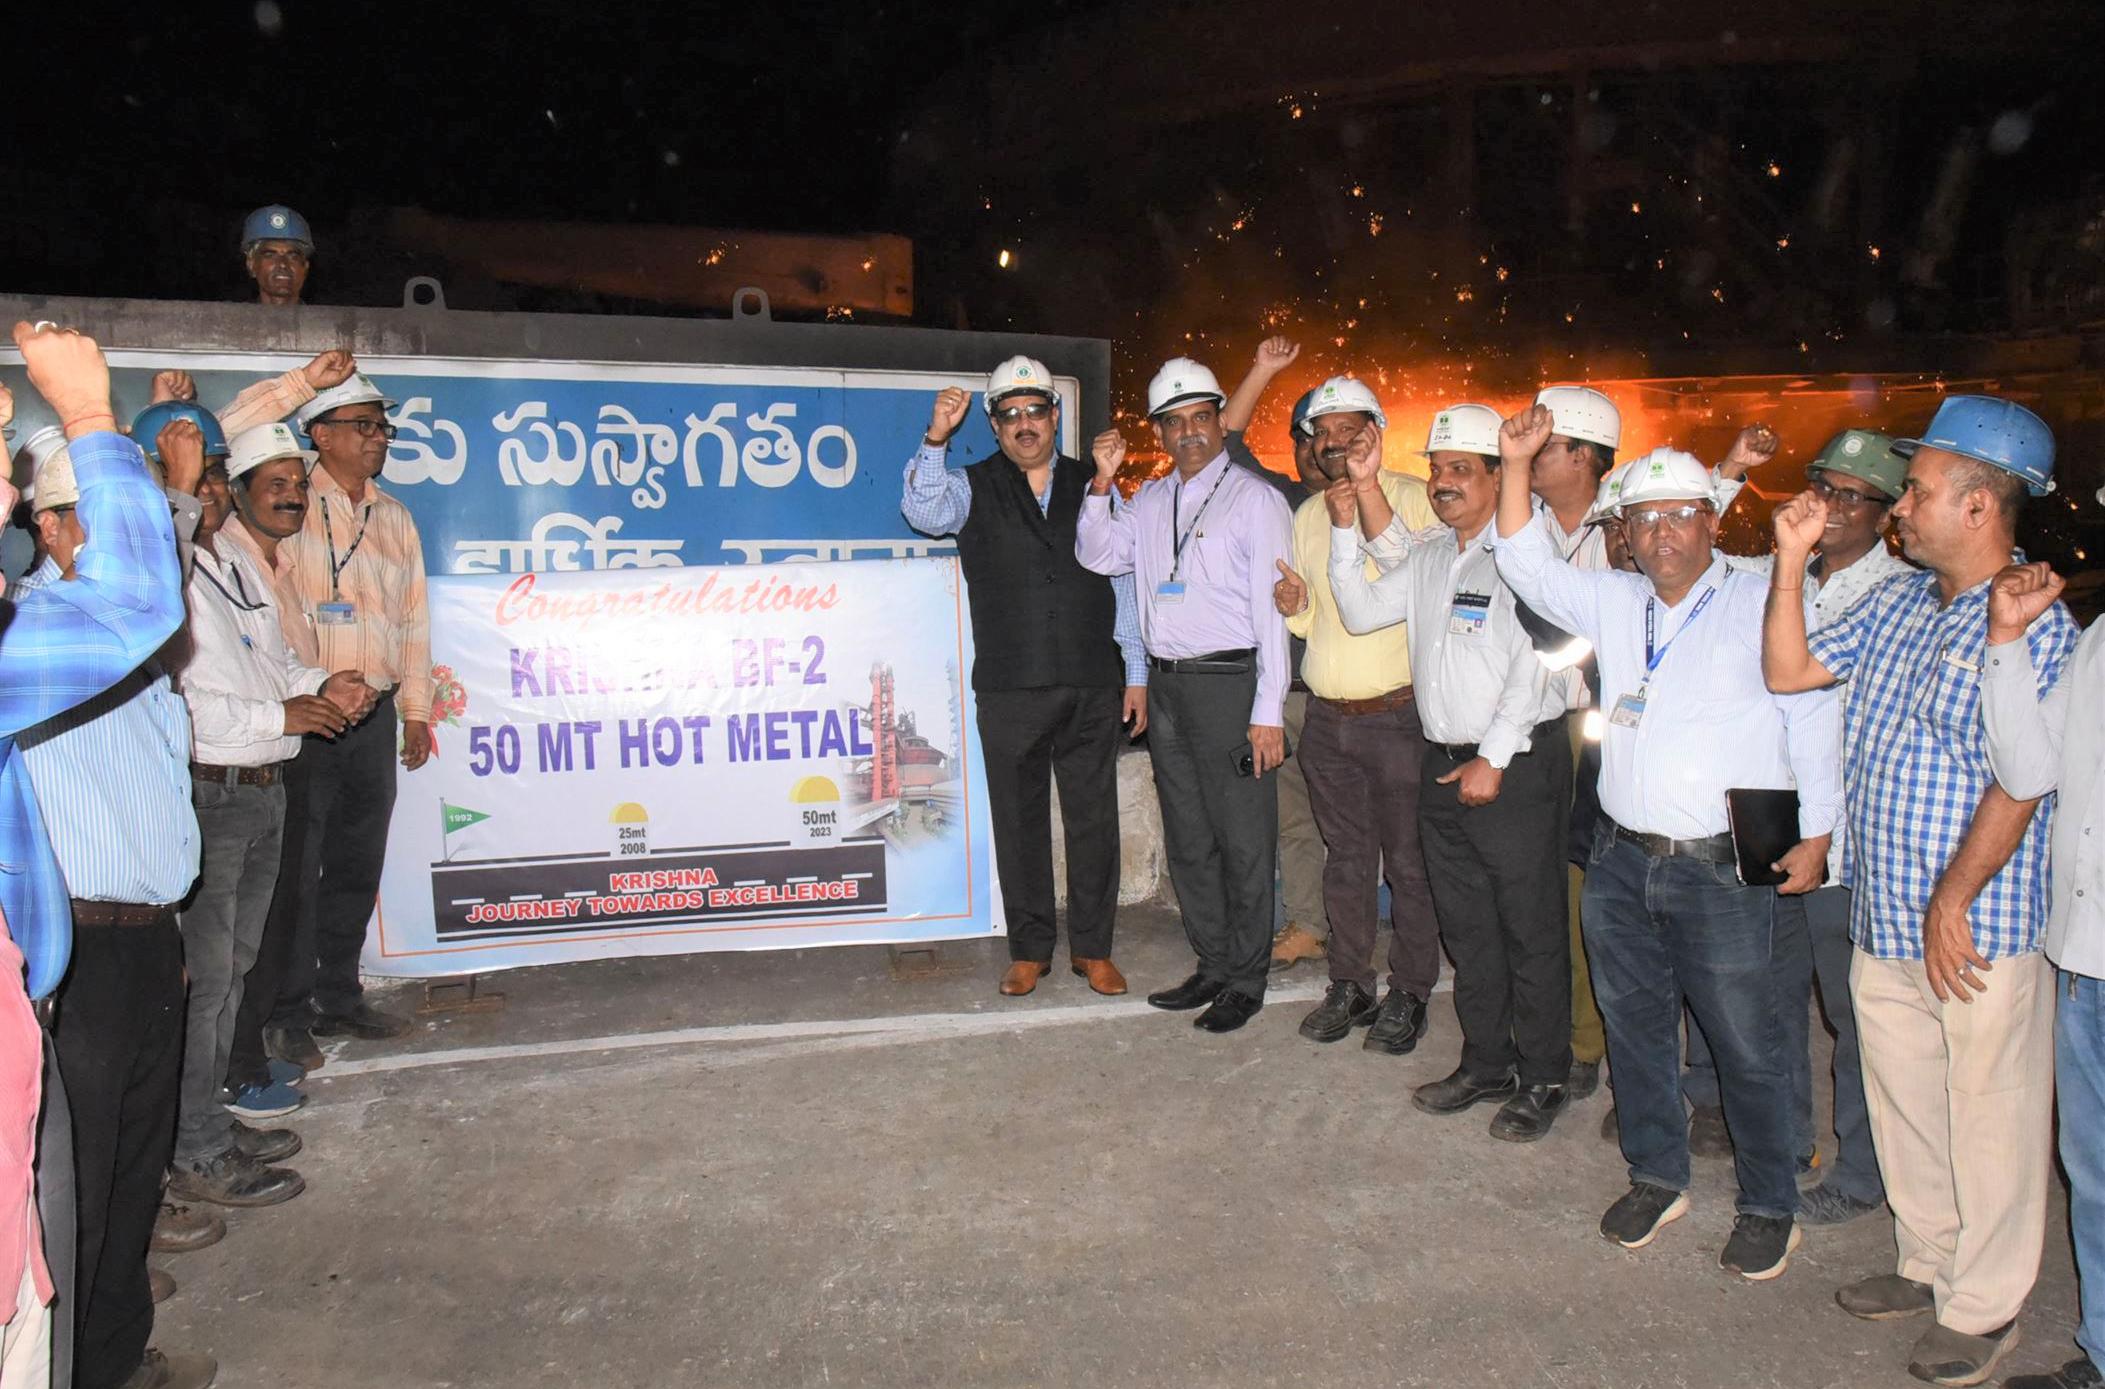  Blast Furnace 2 Krishna of RINL Sets a Blazing Record: Achieves 50 Million Tons of Hot Metal Production Milestone since inception  